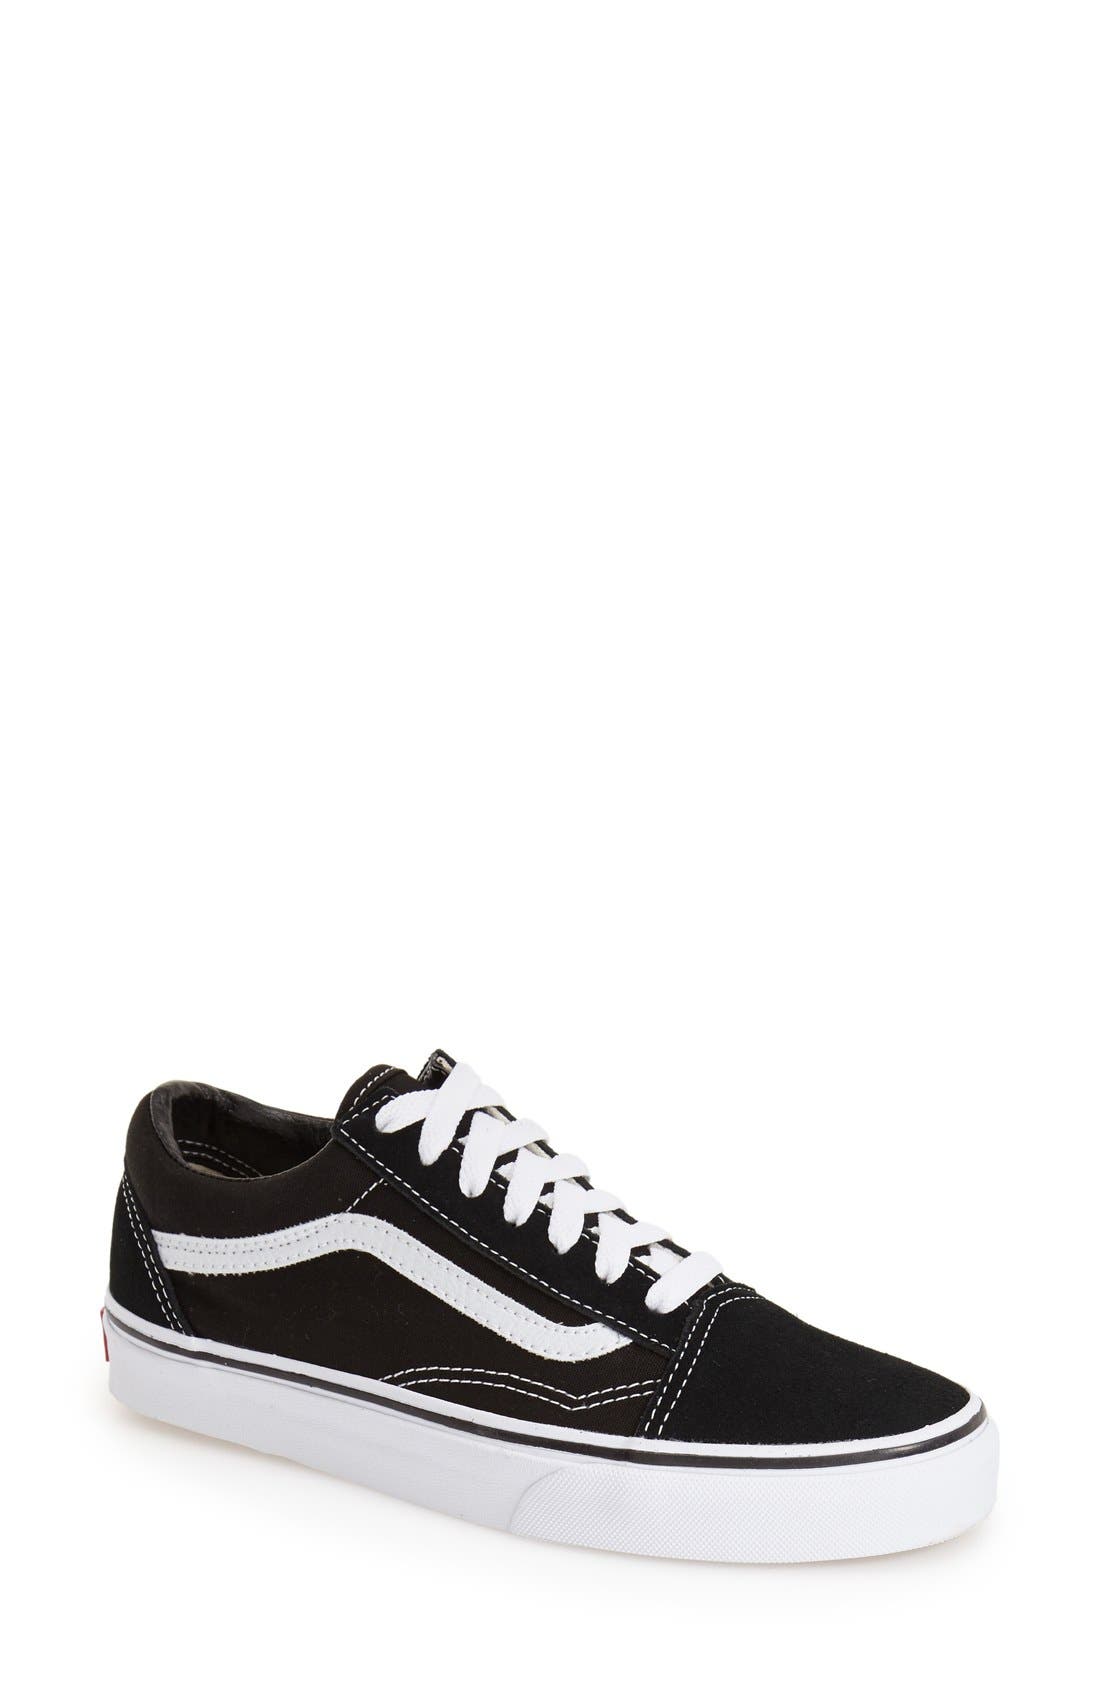 nordstrom fashion sneakers